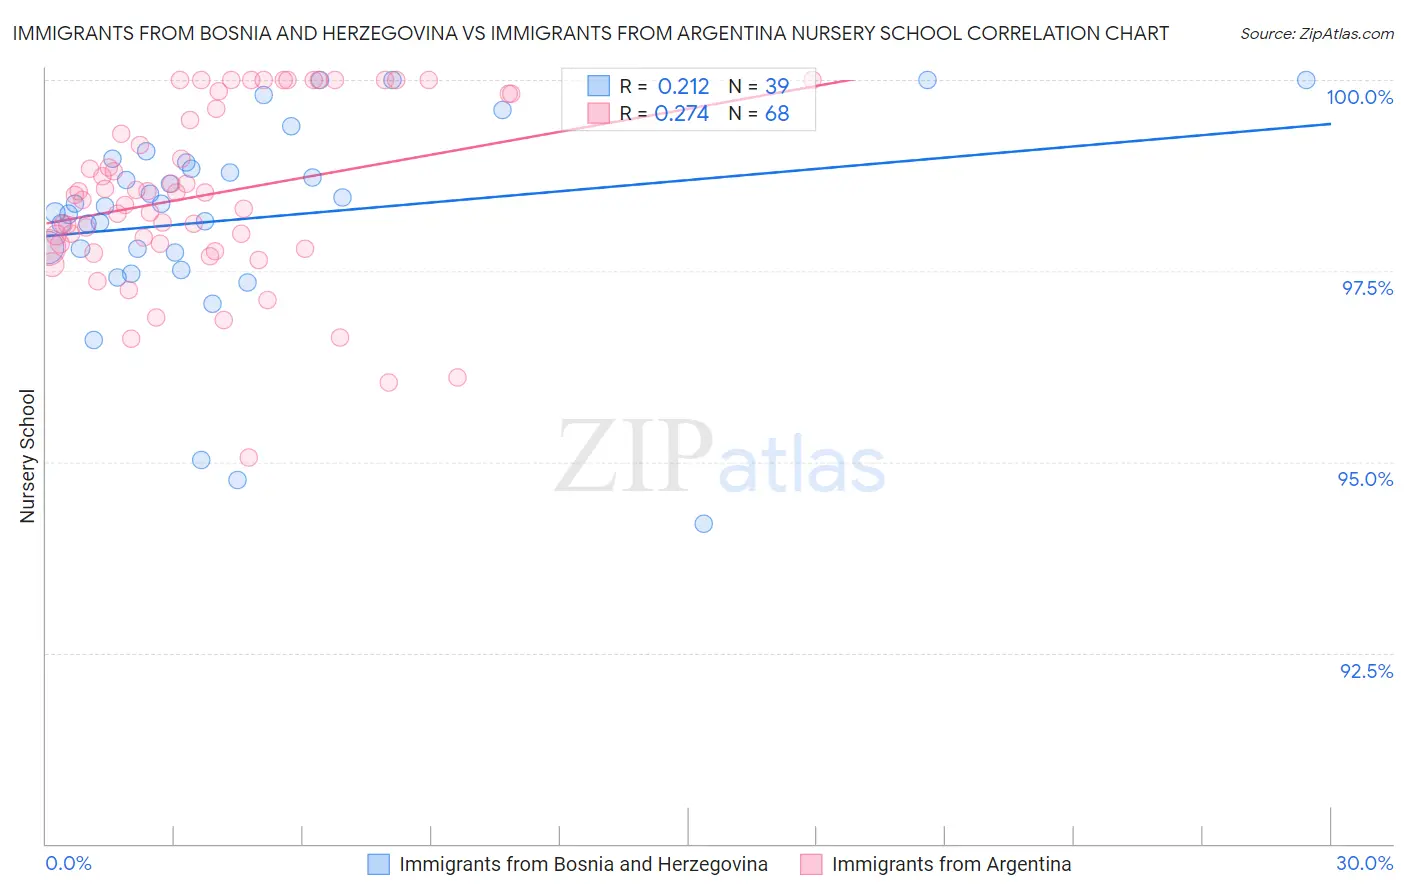 Immigrants from Bosnia and Herzegovina vs Immigrants from Argentina Nursery School